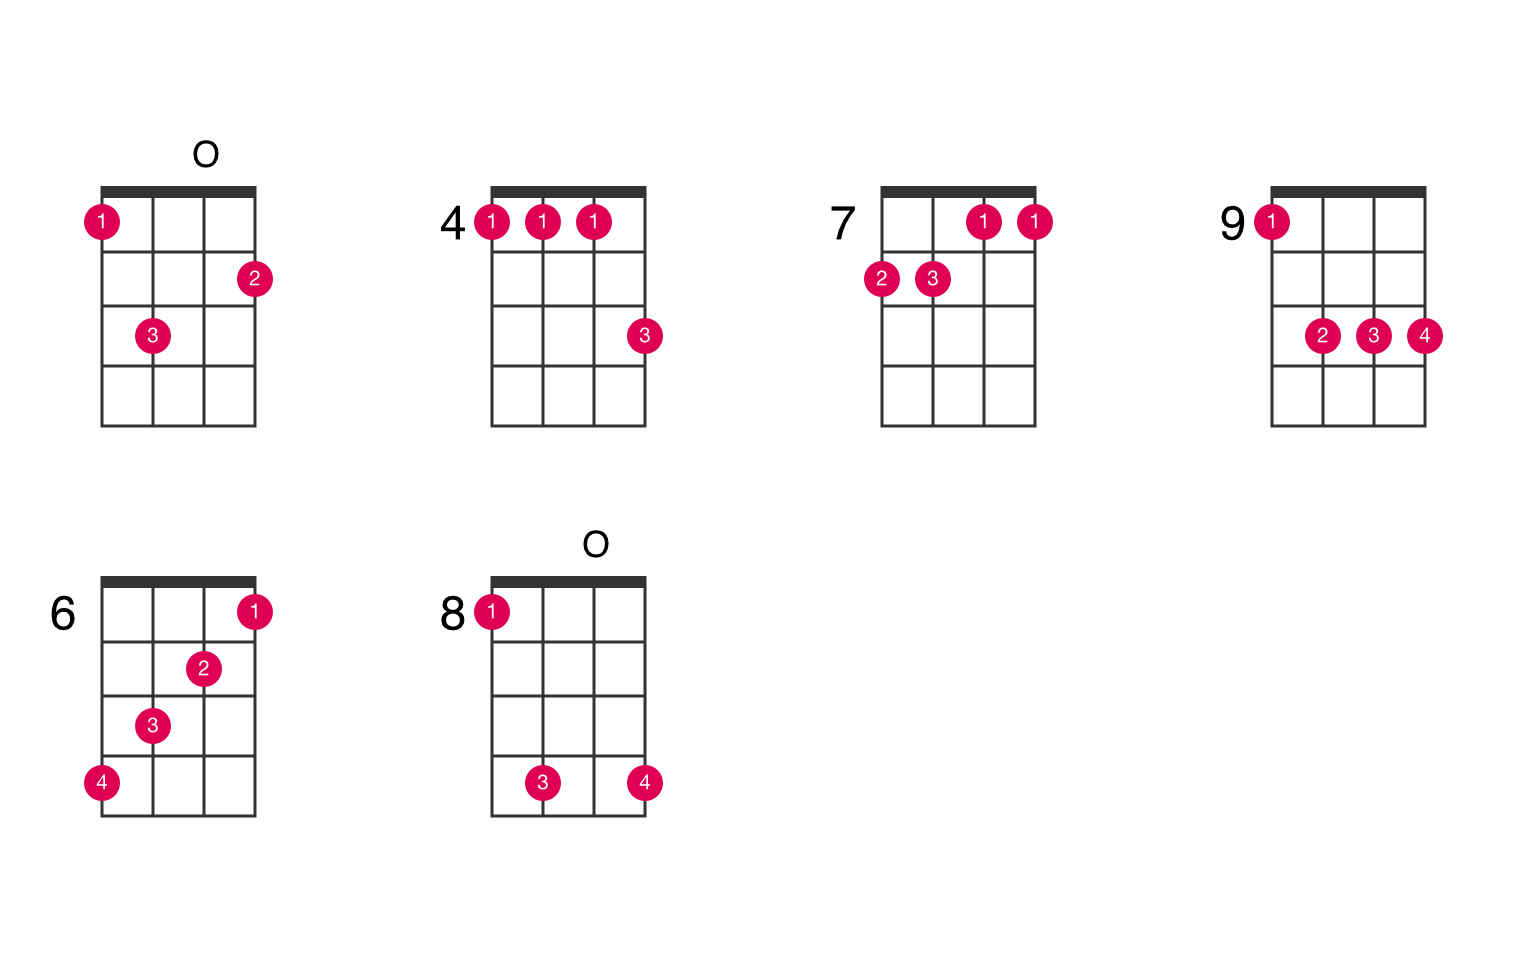 View ukulele chords chart for EM7 chord along with suggested finger positio...